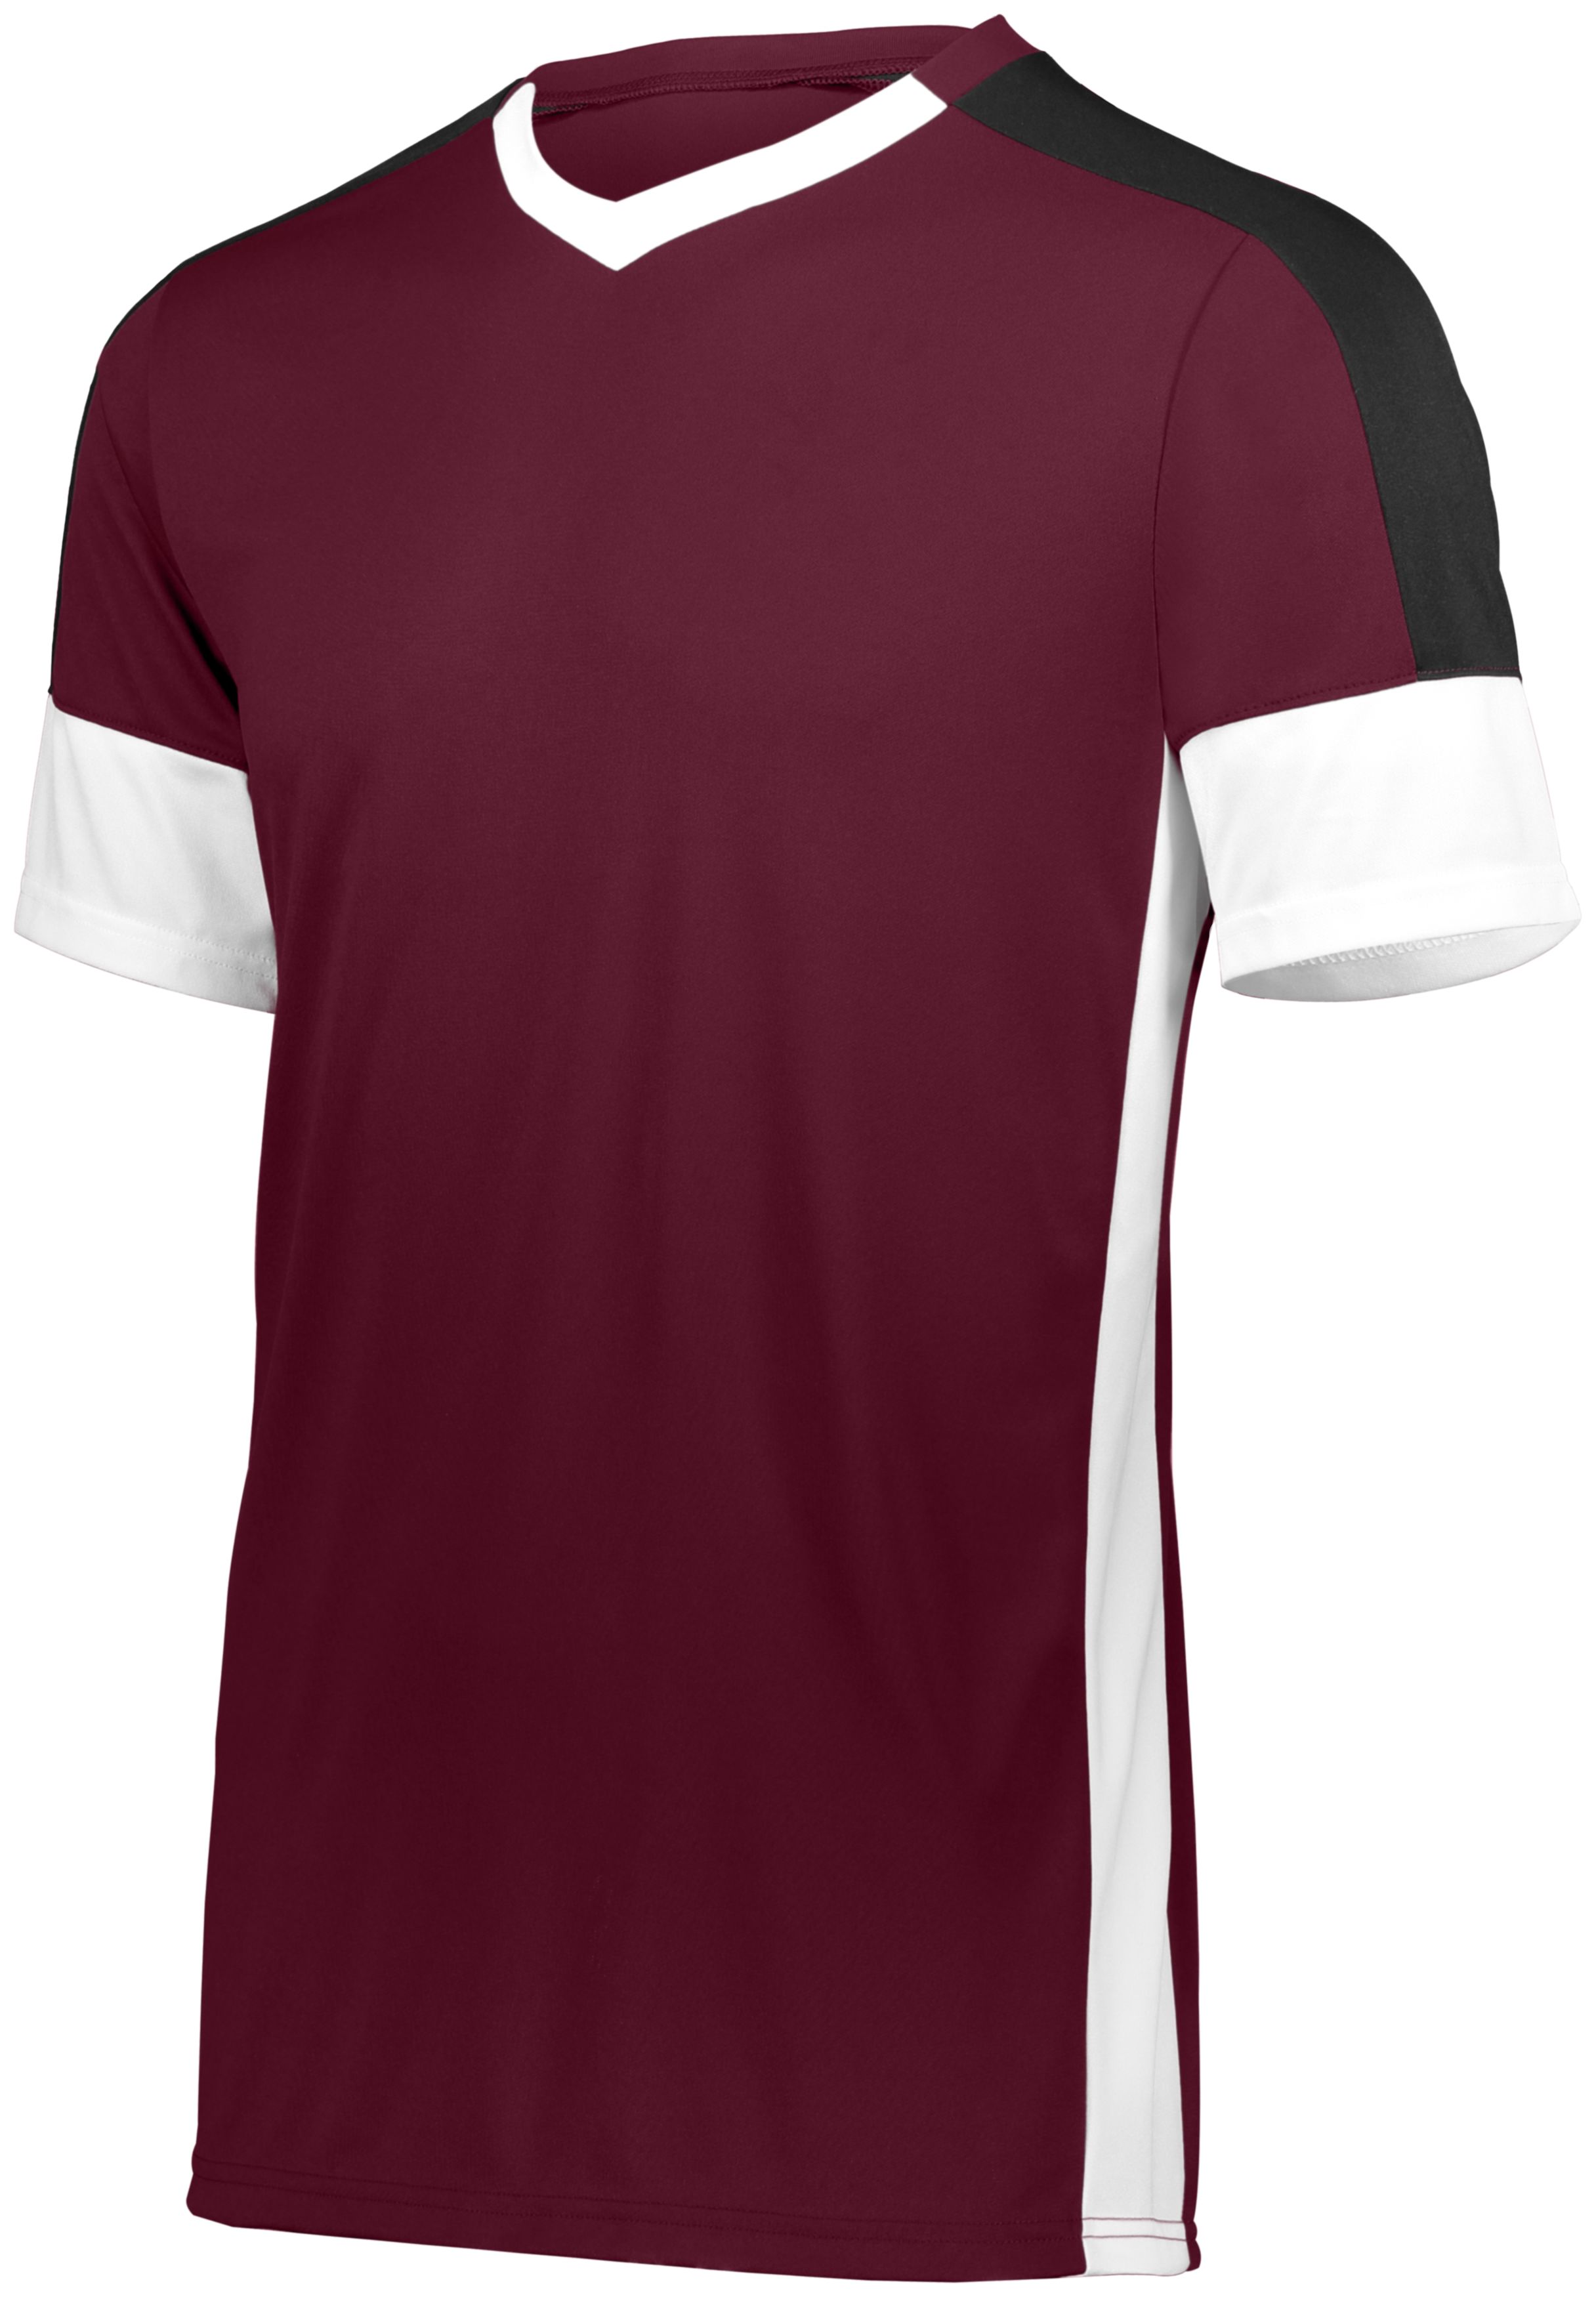 click to view Maroon/White/Black